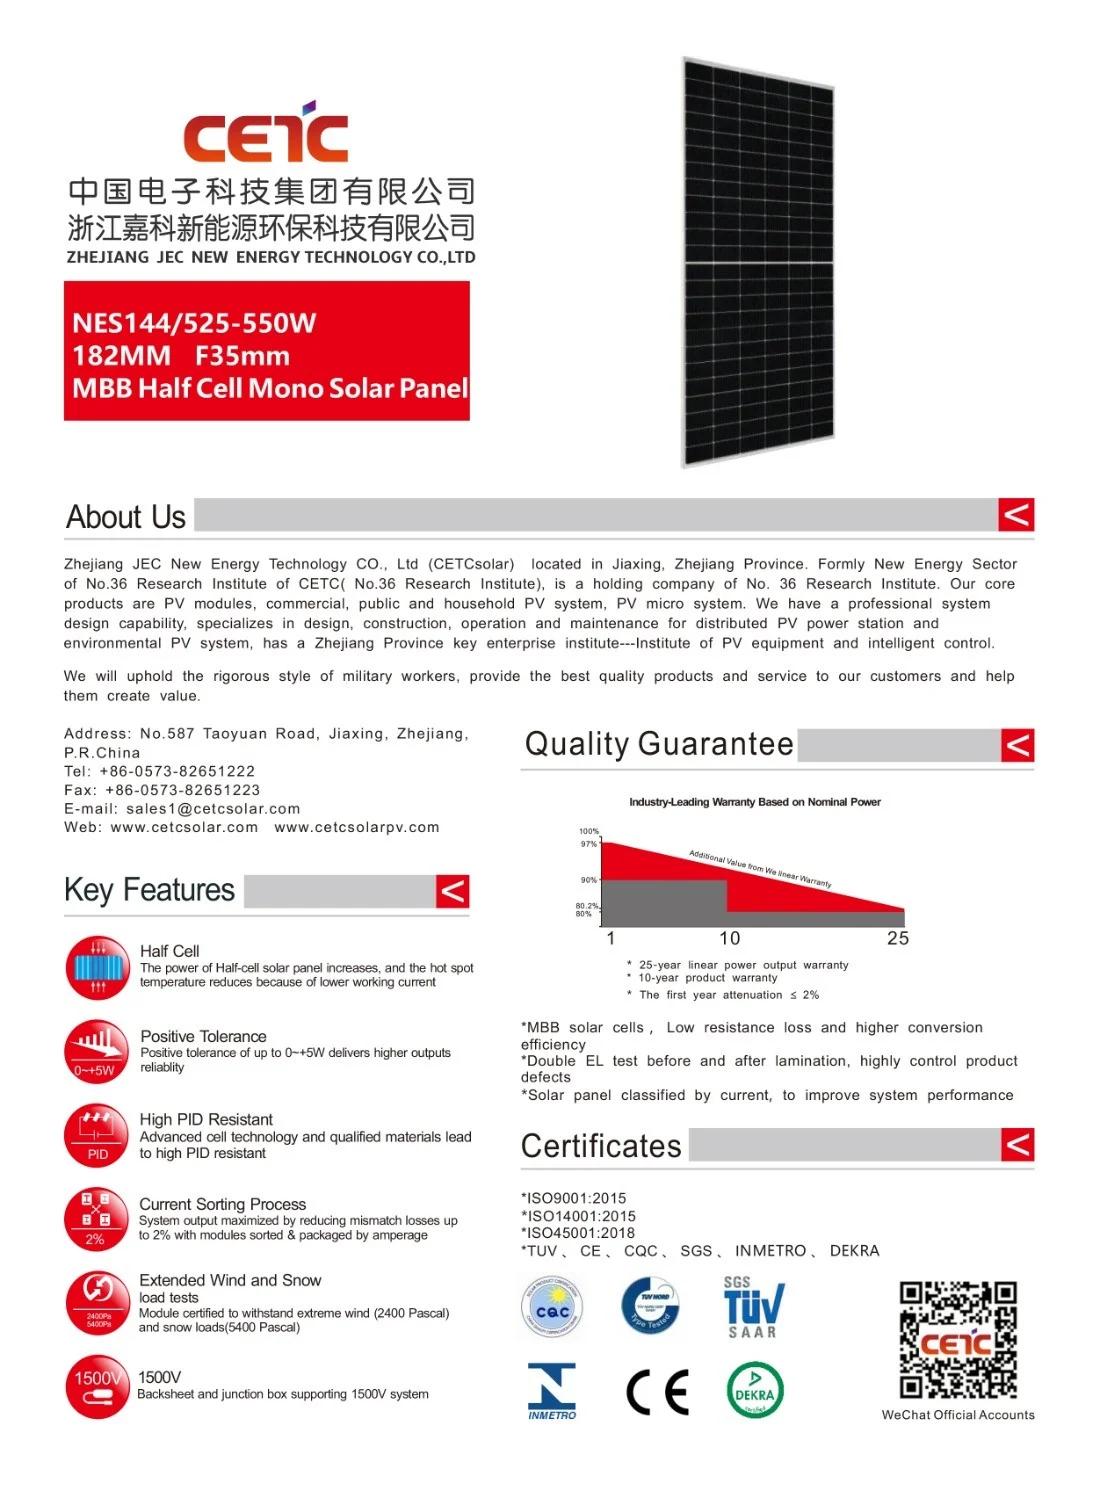 550 watt solar panel specifications - What is the voltage of a 550W solar panel